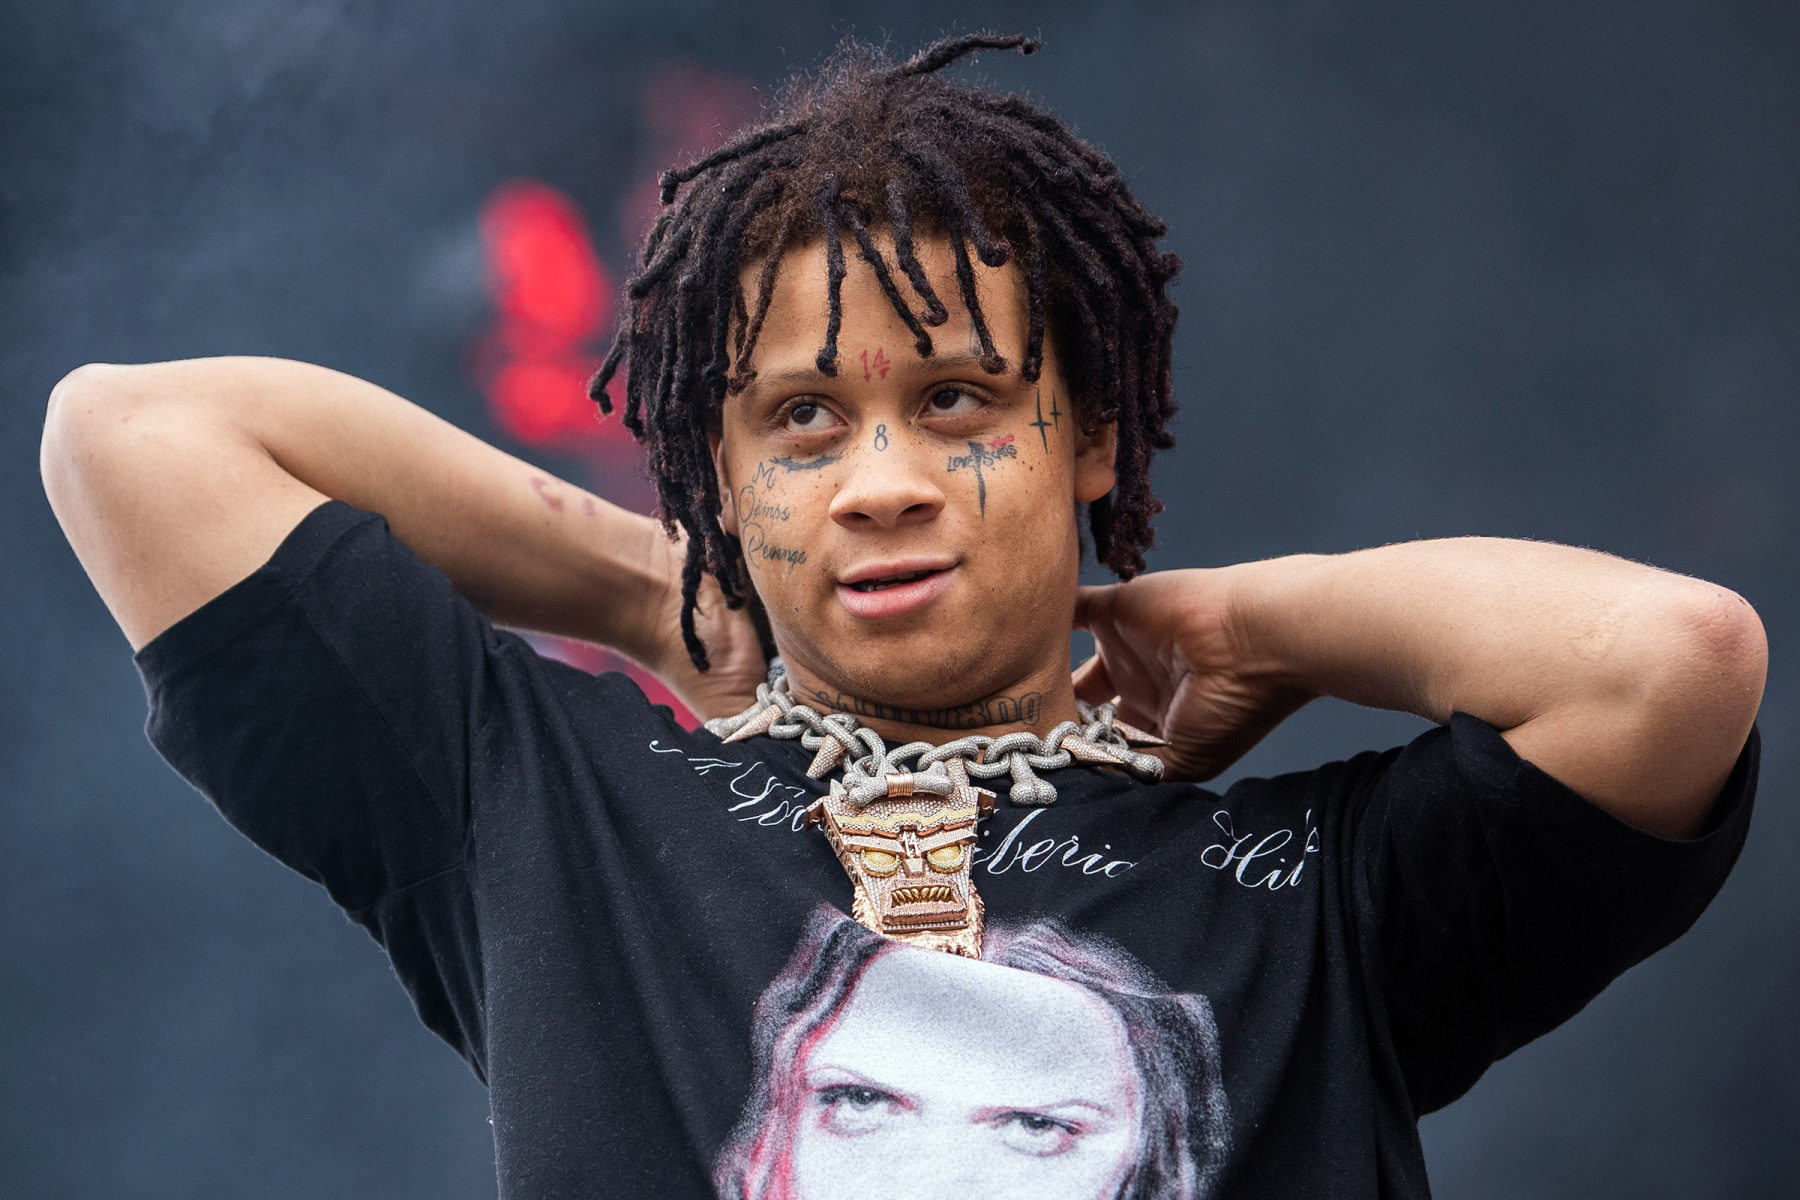 Trippie Redd 'Trip At Knight' First Week Sales Projections HipHopNMore